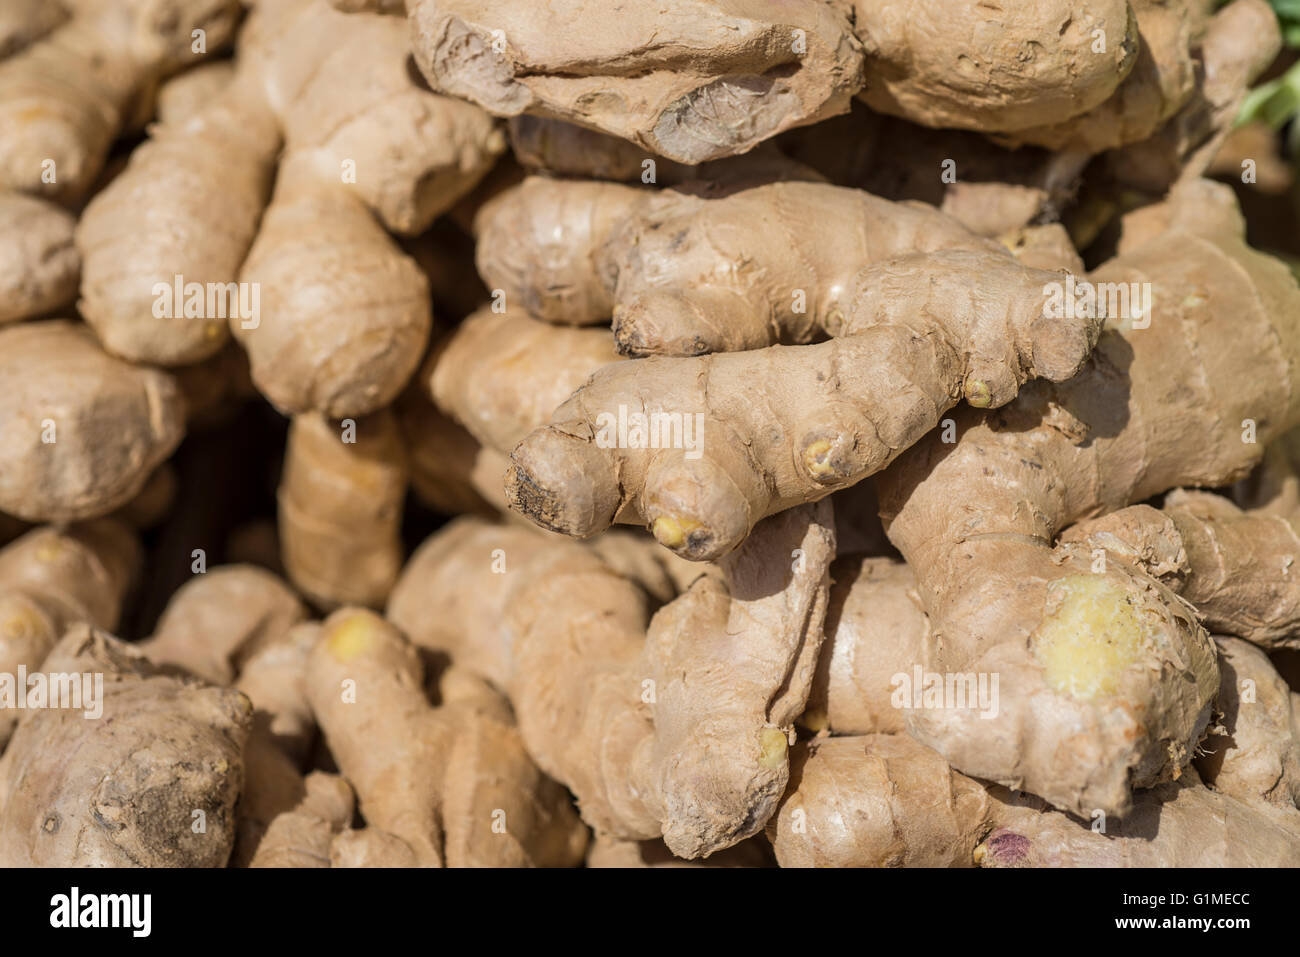 Ginger root at the market Stock Photo